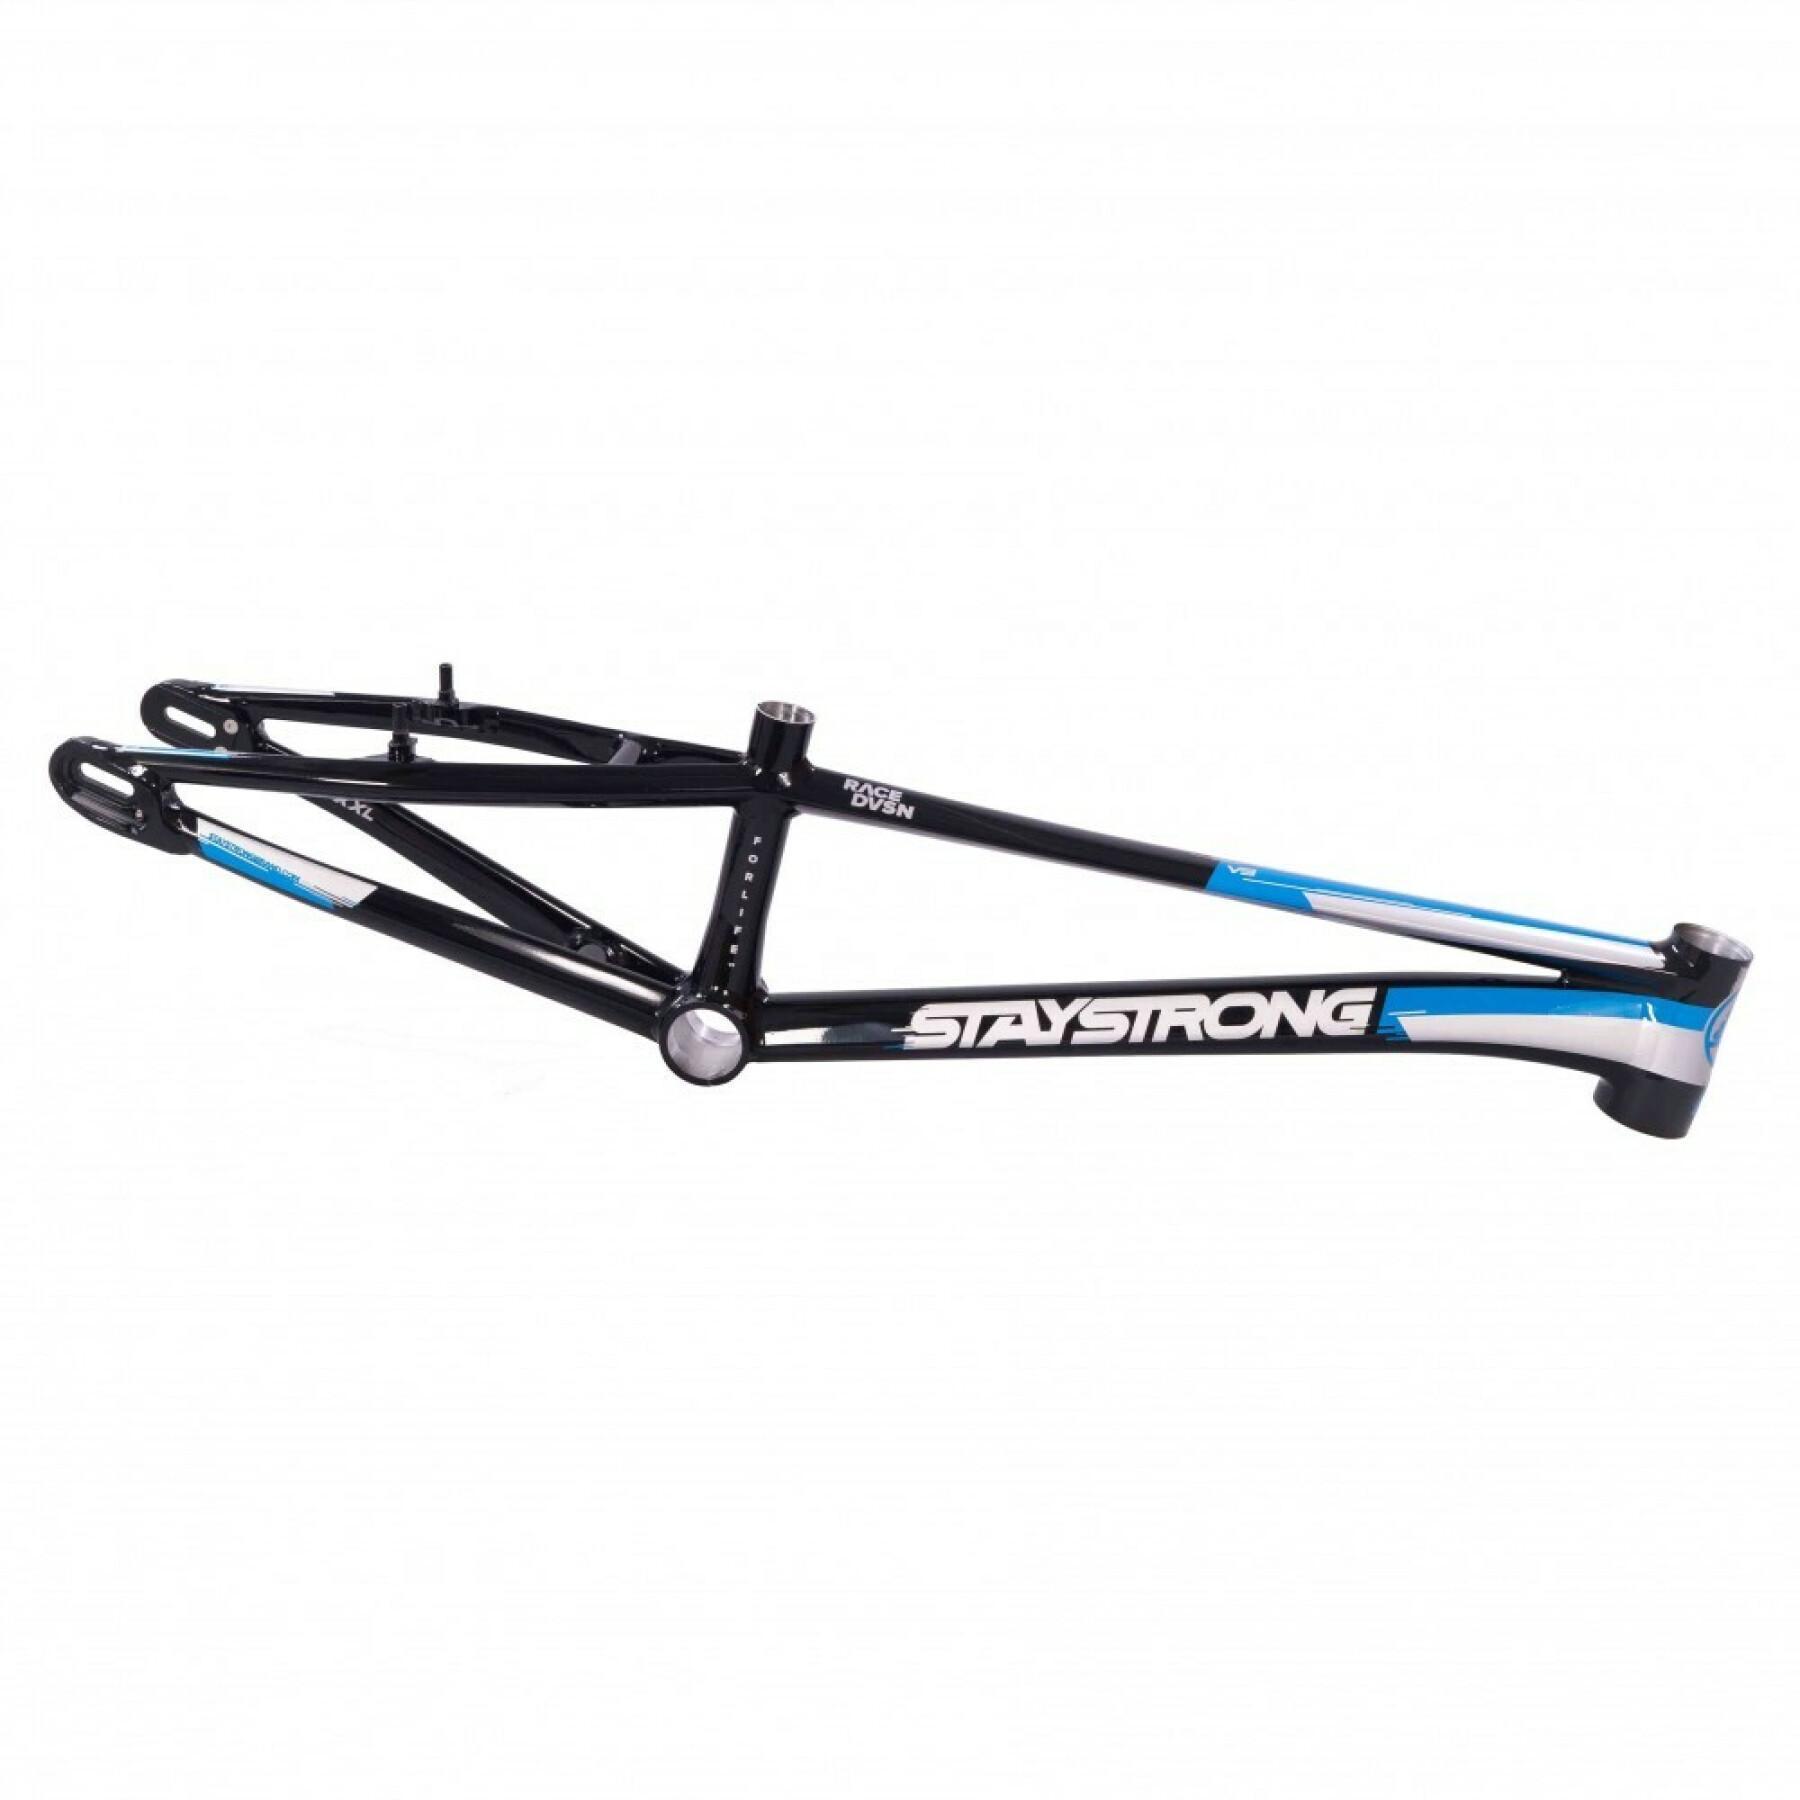 Telaio Bmx Stay Strong For Life V3 - Pro